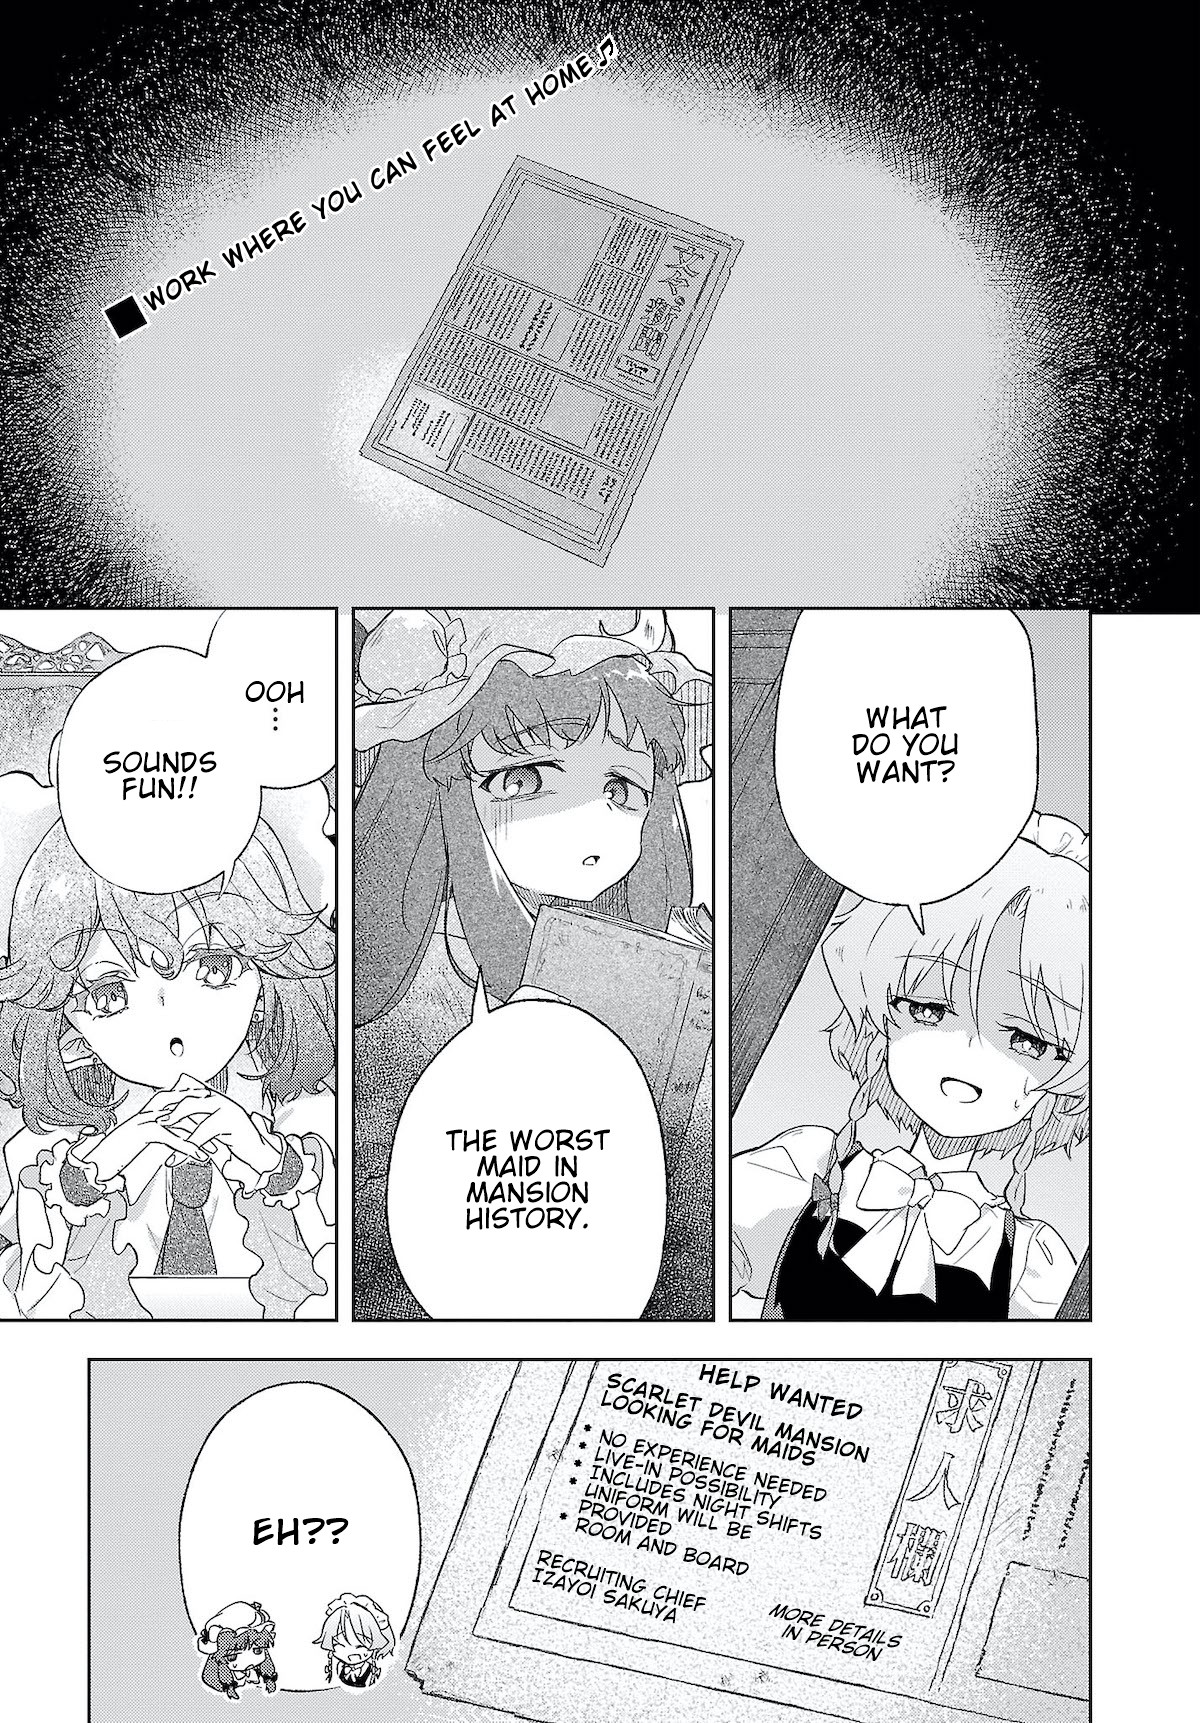 Touhou ~ Starving Marisa's Blessed Meal - Page 1